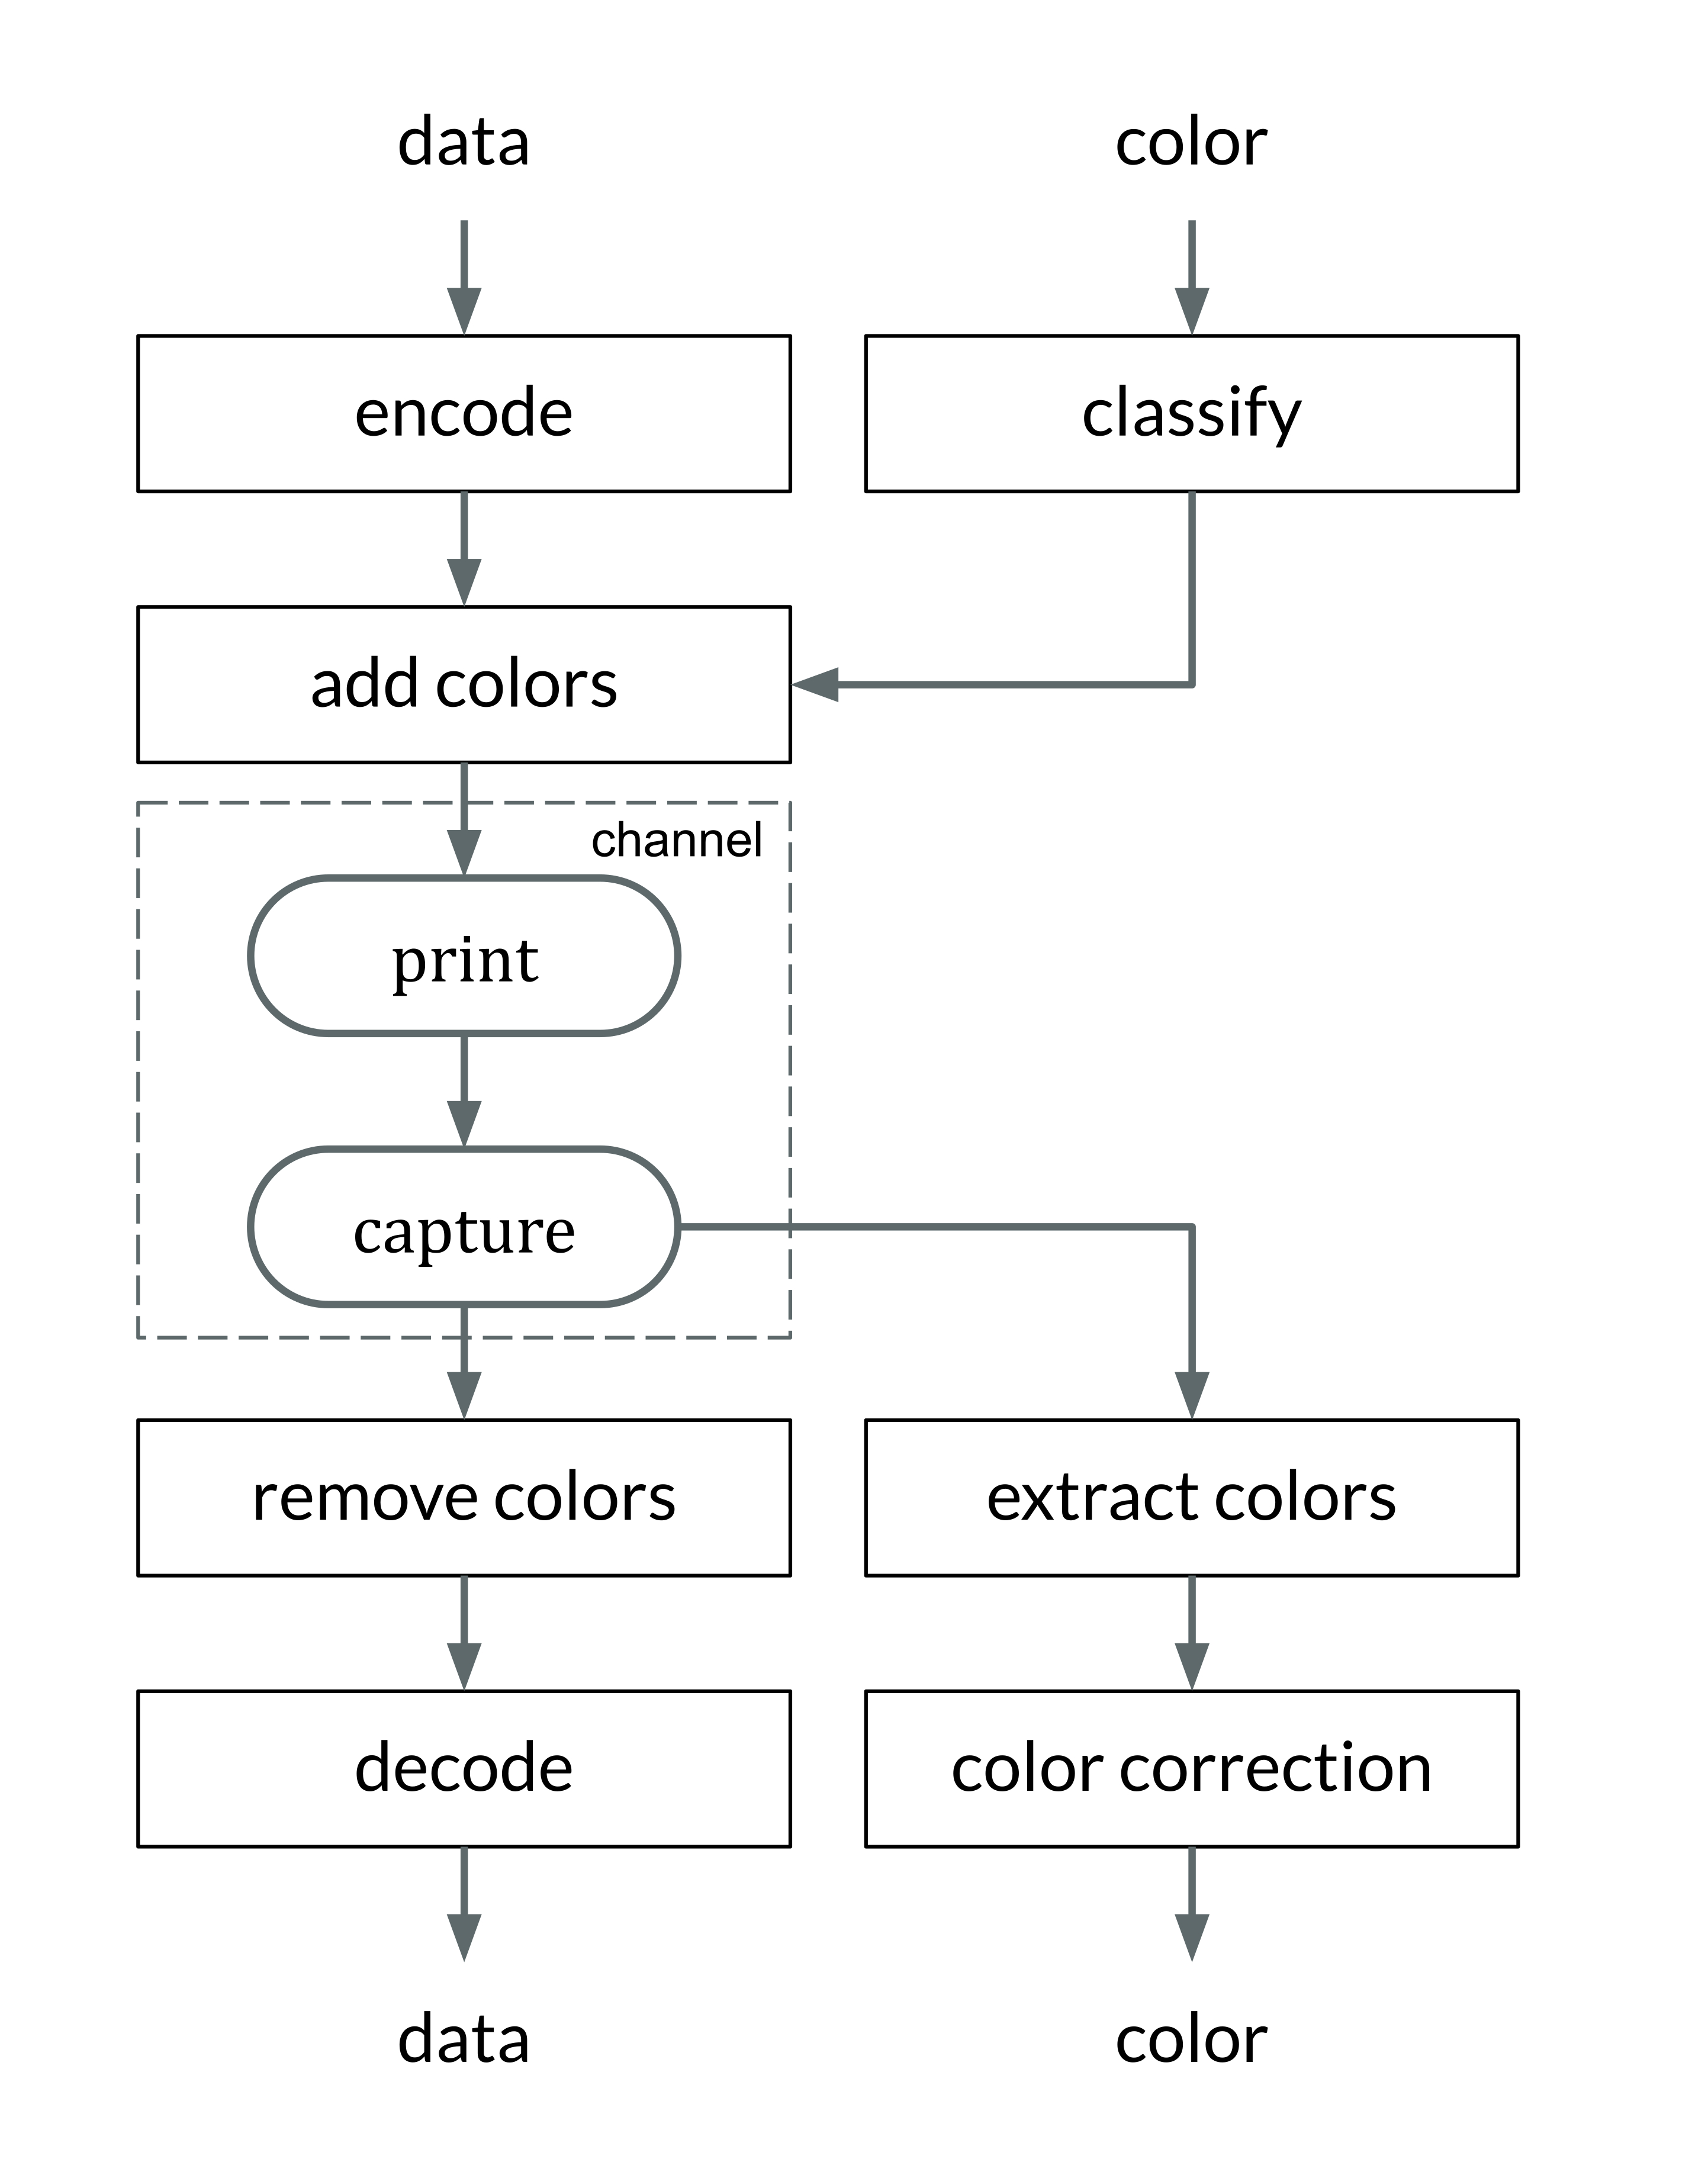 Block diagram for a back-compatible encoding-decoding process of a QR Code that features the embedding of a color layer for colorimetric applications. The process can be seen as a global encoding process (digital encode and color encode), followed by a channel (print and capture) and a global decoding process (extract colors and decode digital information). This process is back-compatible with state-of-the-art scanners, which remove colors and achieve the decoding of the data; and also compatible with new decoders, which can benefit from color interrogation. The back-compatibility is achieved by following certain rules in the color encoding process (i.e. use the same threshold when placing the colors than when removing them).